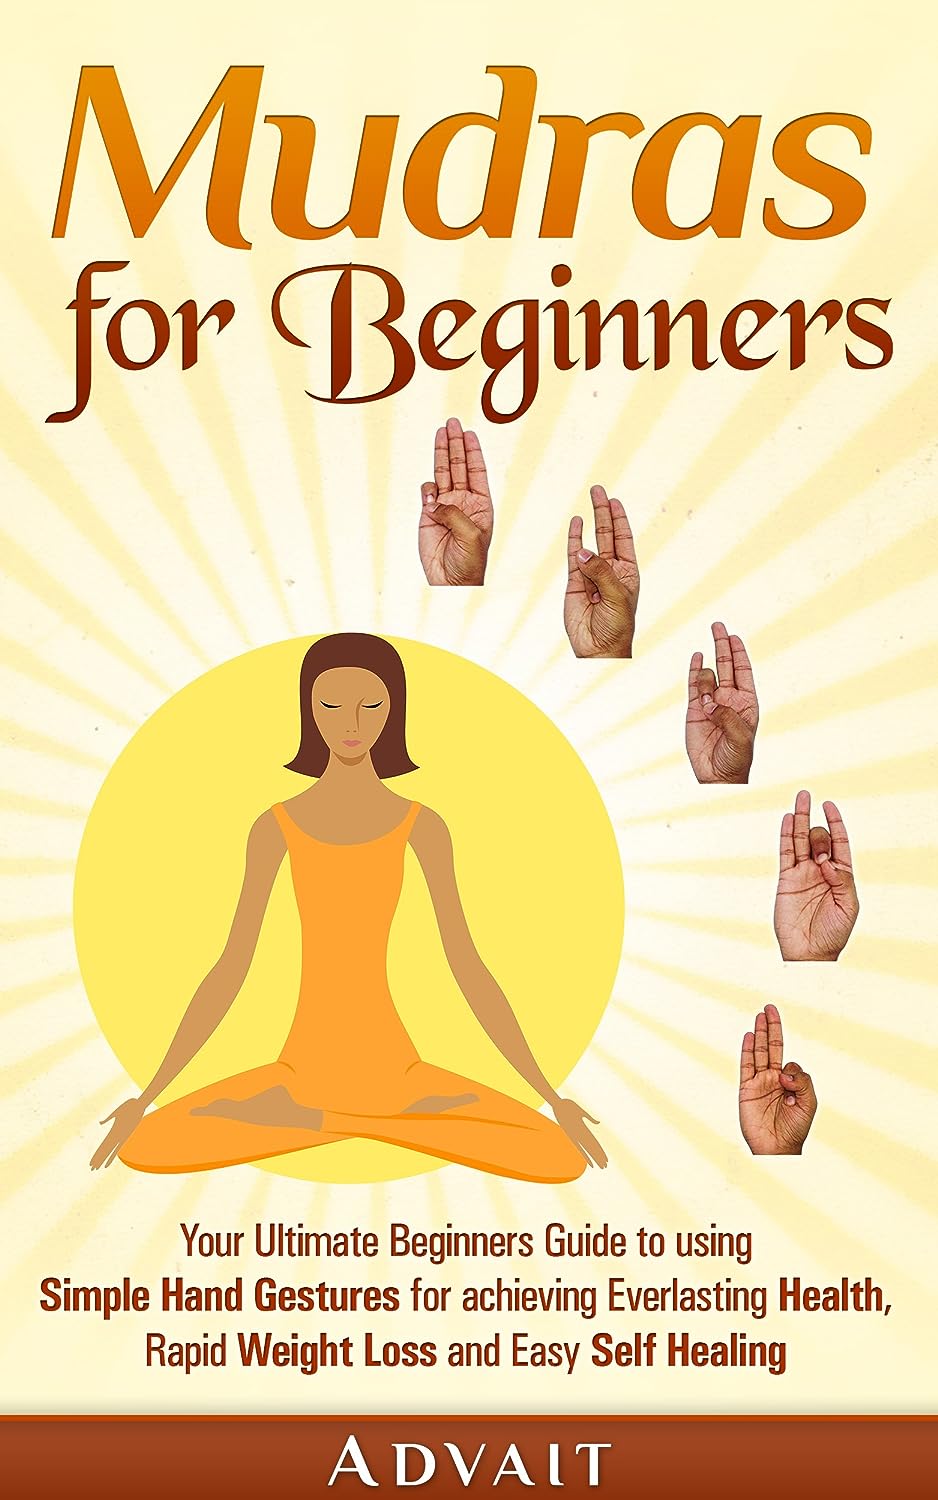 Mudras for Beginners-Your Ultimate Beginners Guide to using Simple Hand Gestures for achieving Everlasting Health-Rapid Weight Loss and Easy Self Healing-Stumbit Mudras